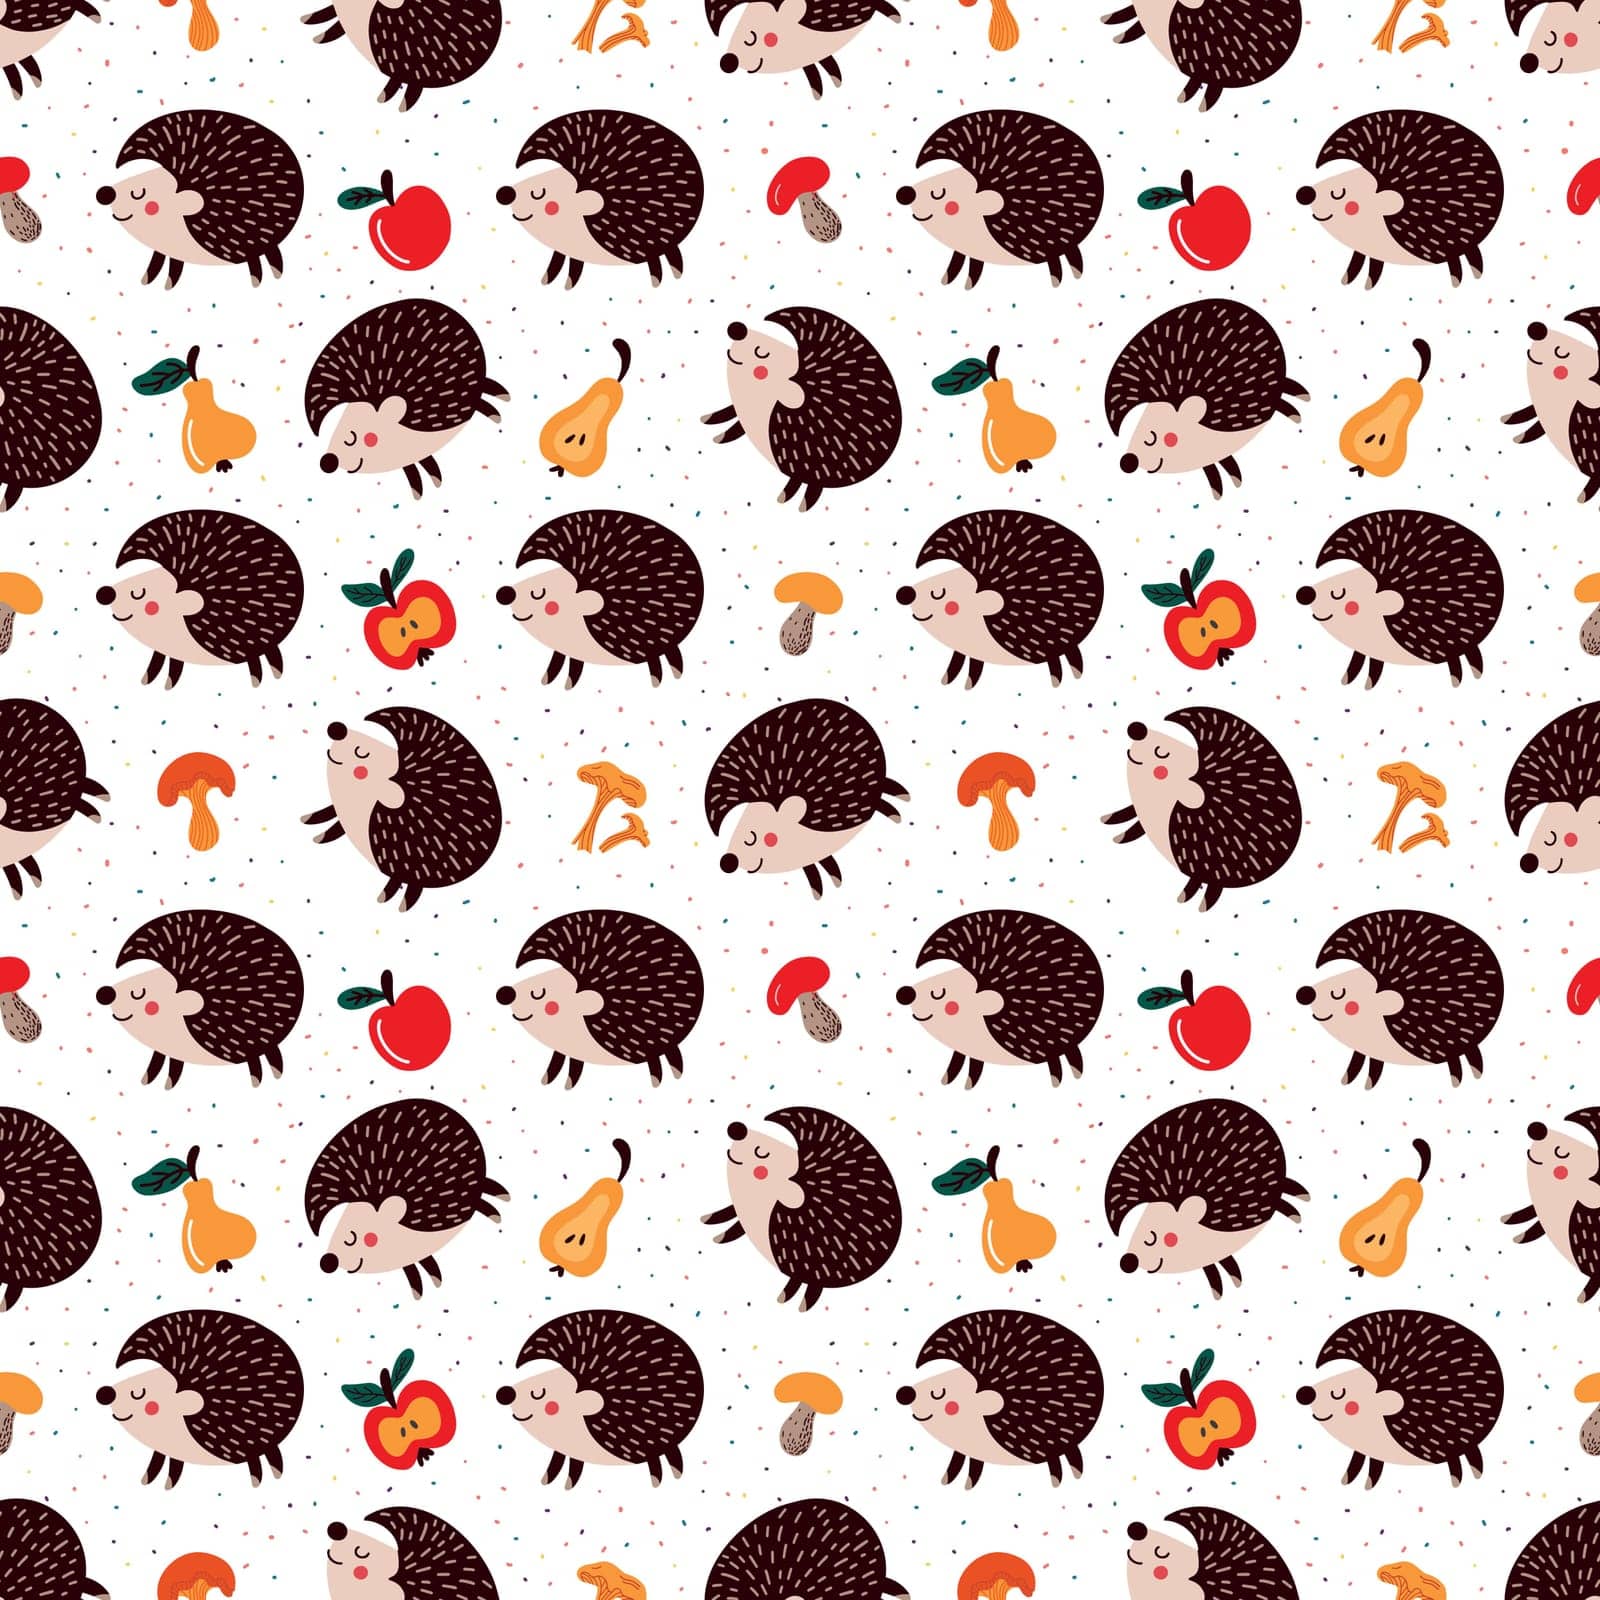 Seamless pattern of cute cartoon hedgehogs among autumn leaves and fruits with mushrooms on white backdrop